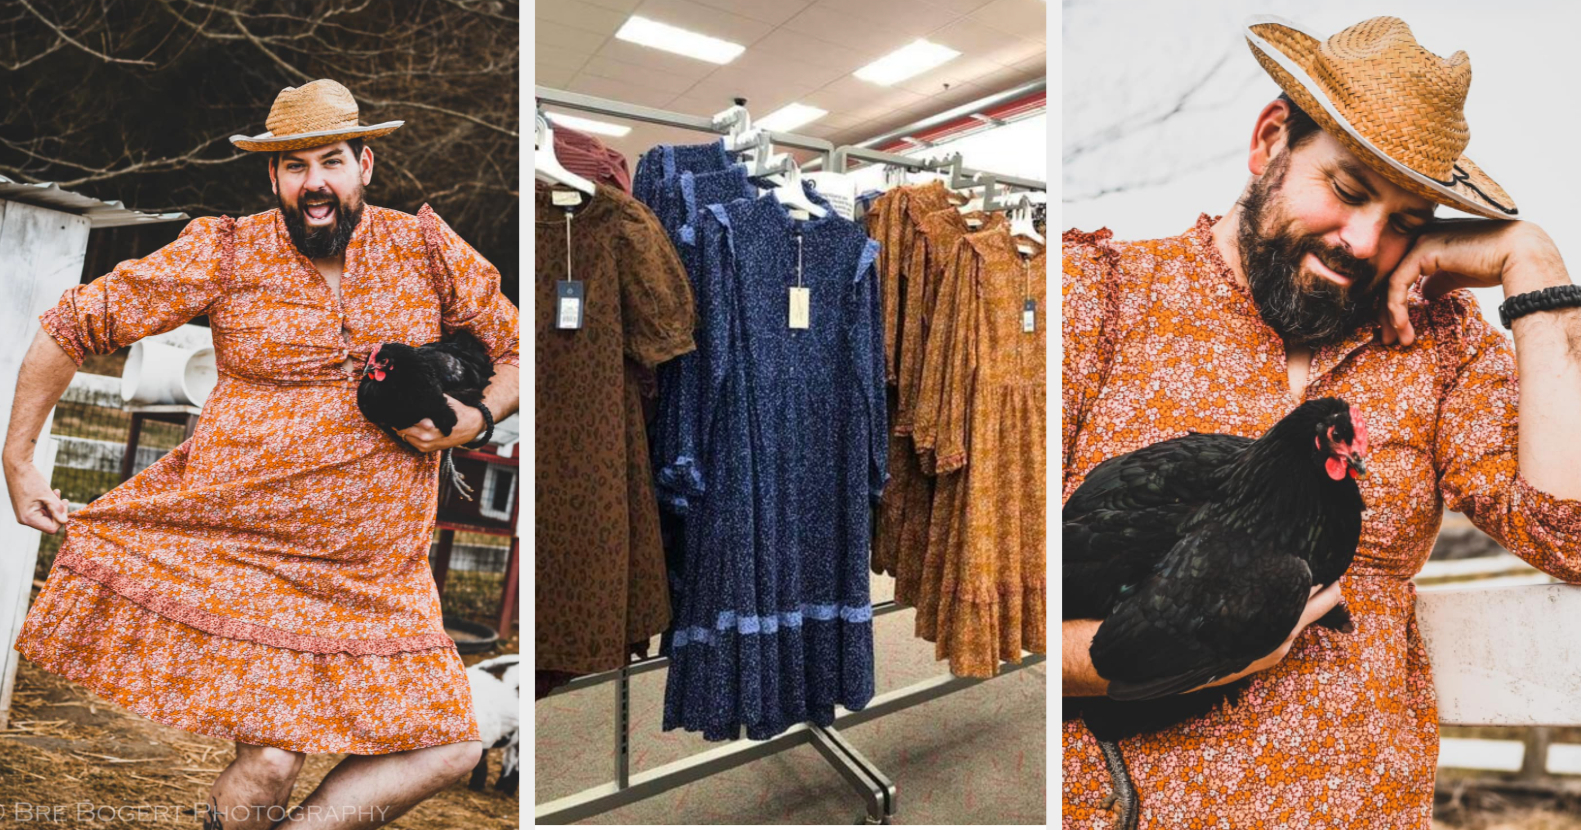 People are hilariously roasting Target's line of prairie dresses